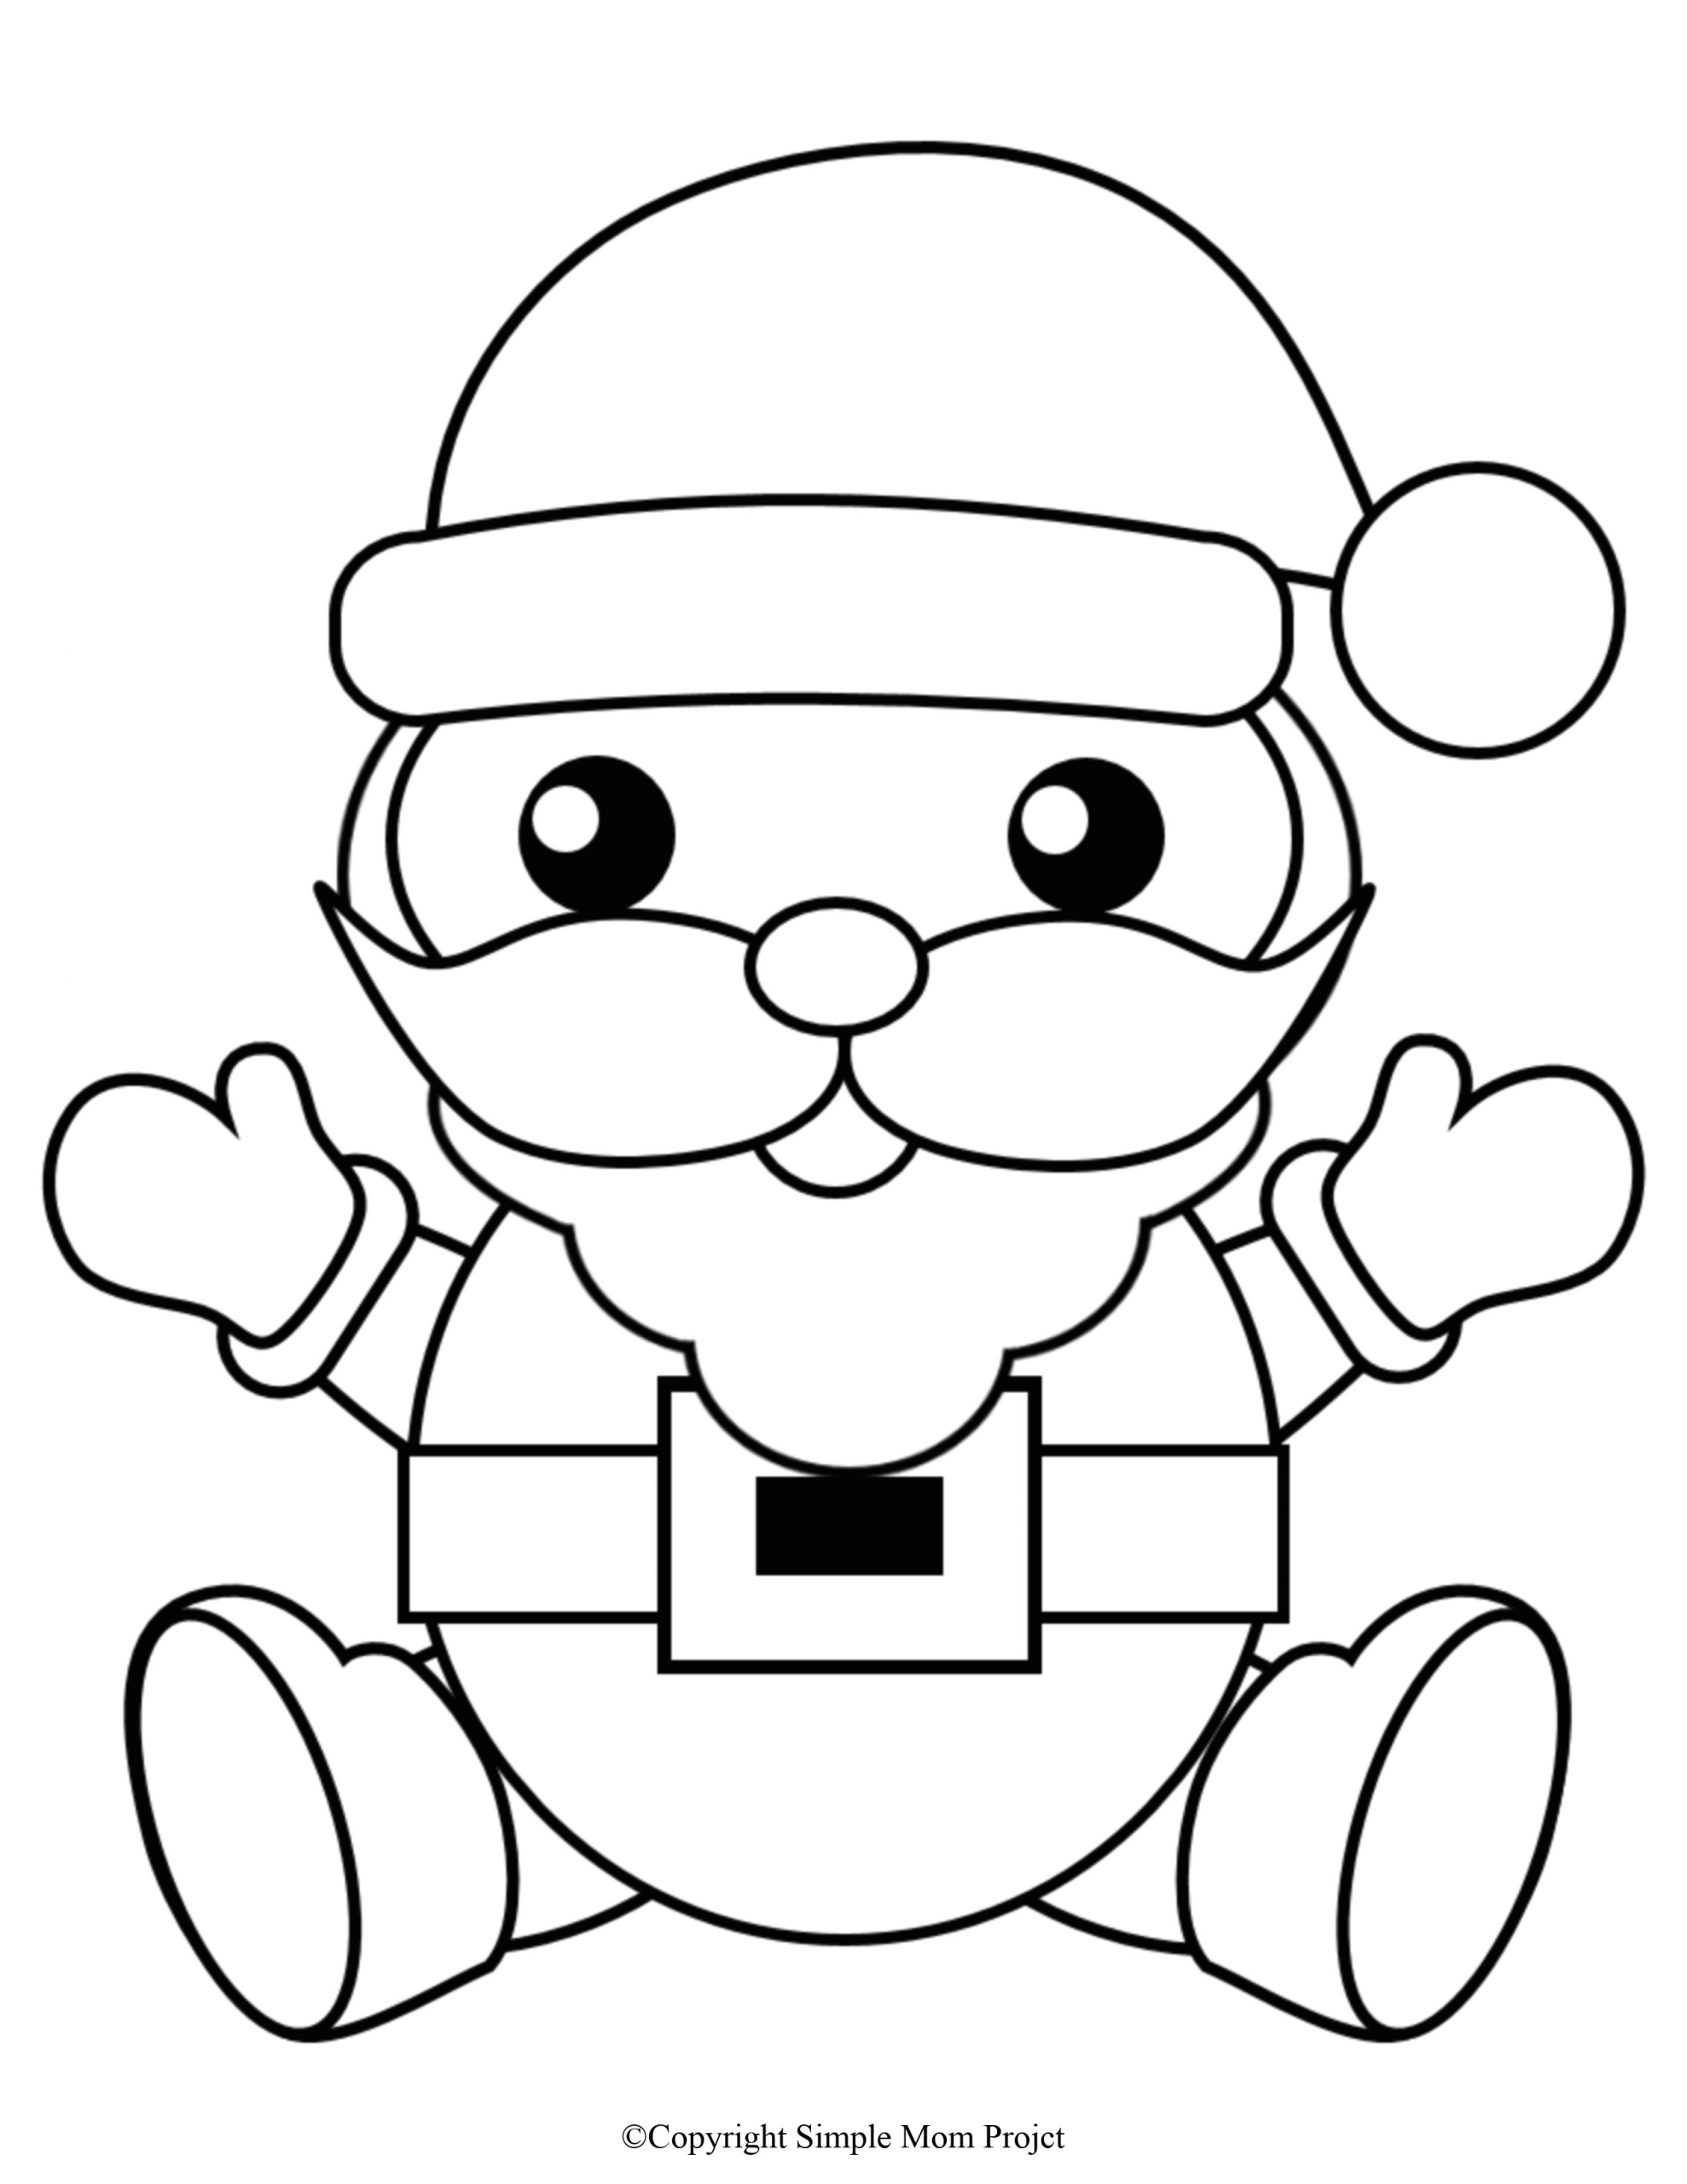 How to Make Easy Santa Claus Drawing Free Printable Christmas Coloring Sheets for Kids and Adults